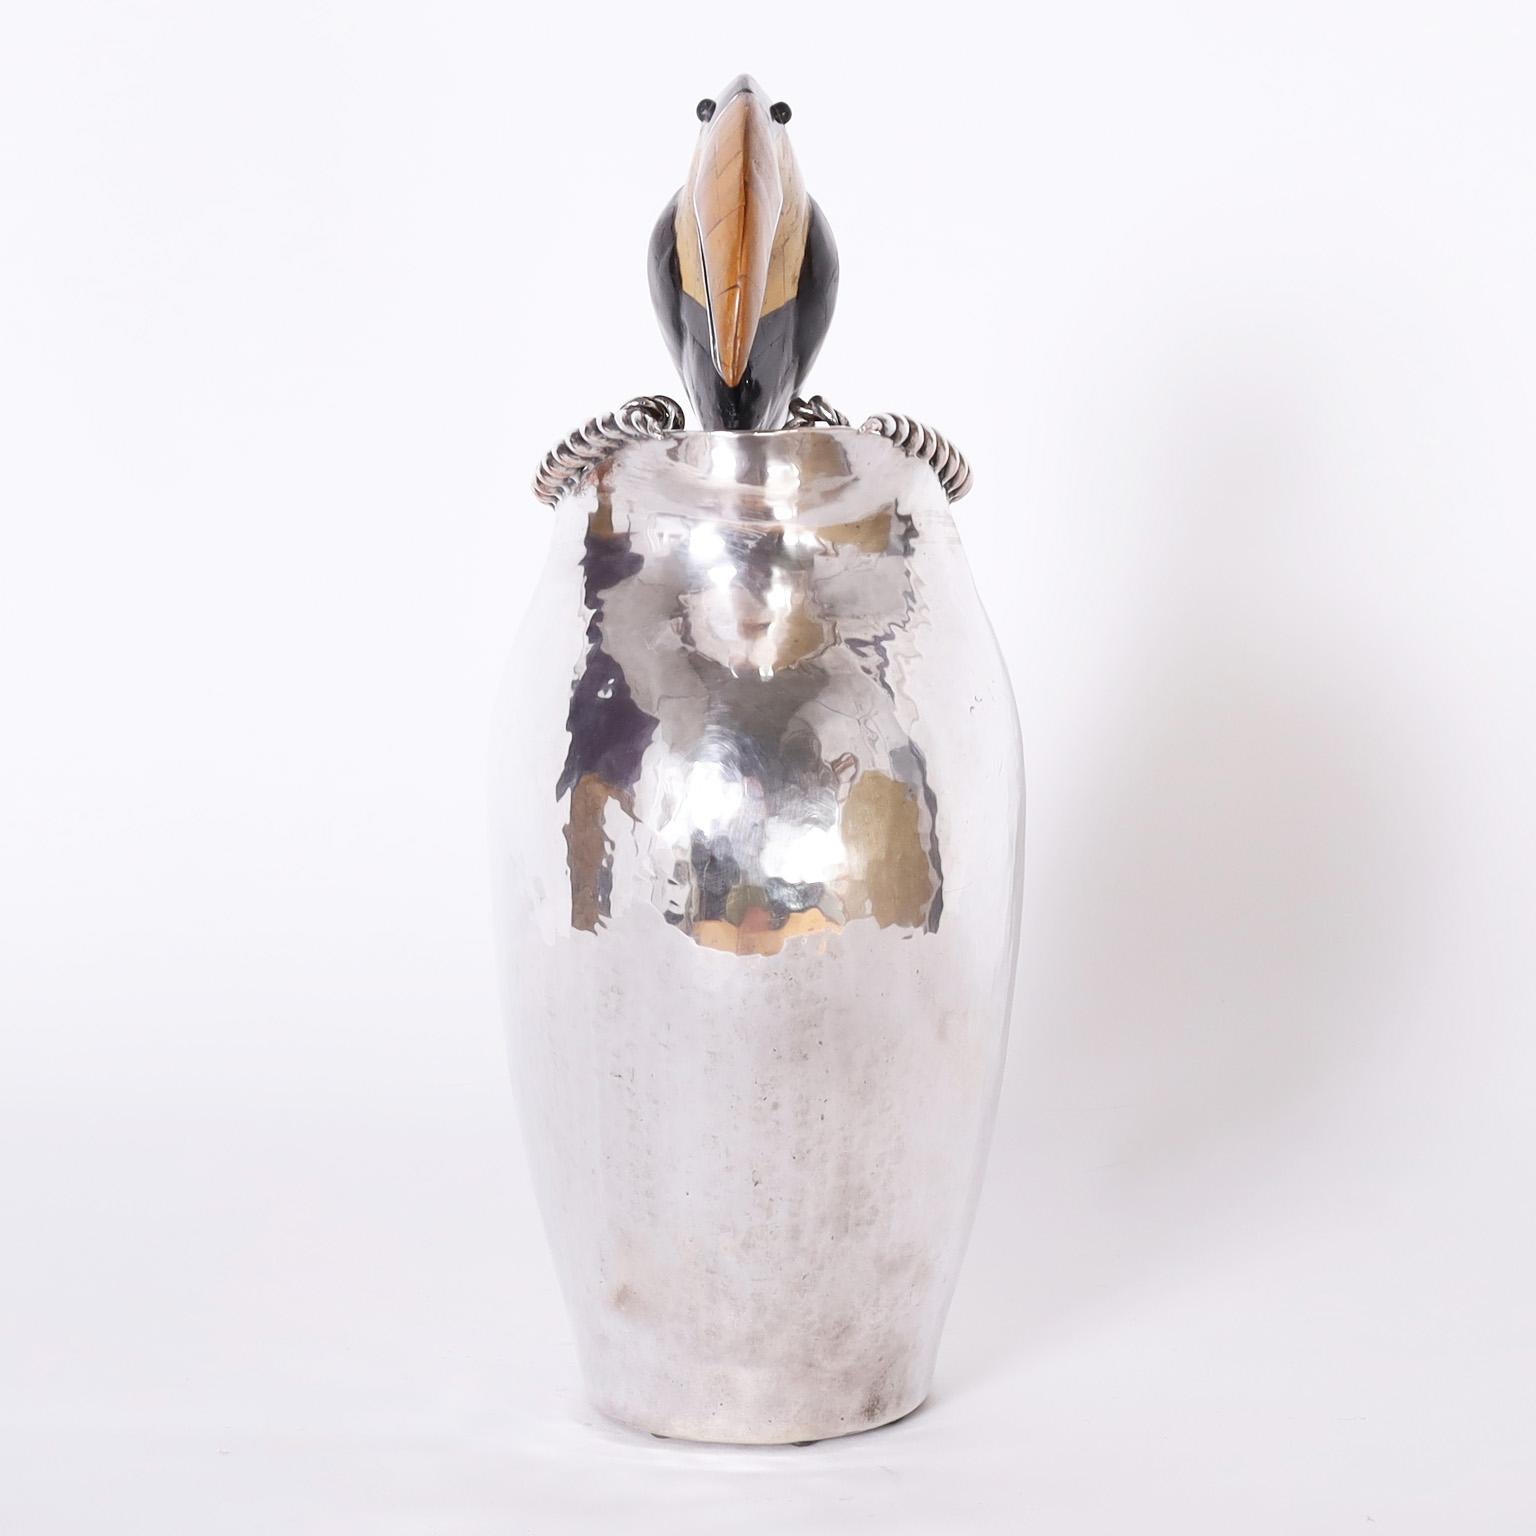 Water pitcher hand crafted by a master silversmith with copper and hand hammered to a graceful modern form, then silver plated. Featuring a toucan clad in exotic stones perched on top. Signed Emilia Castillo on the bottom.